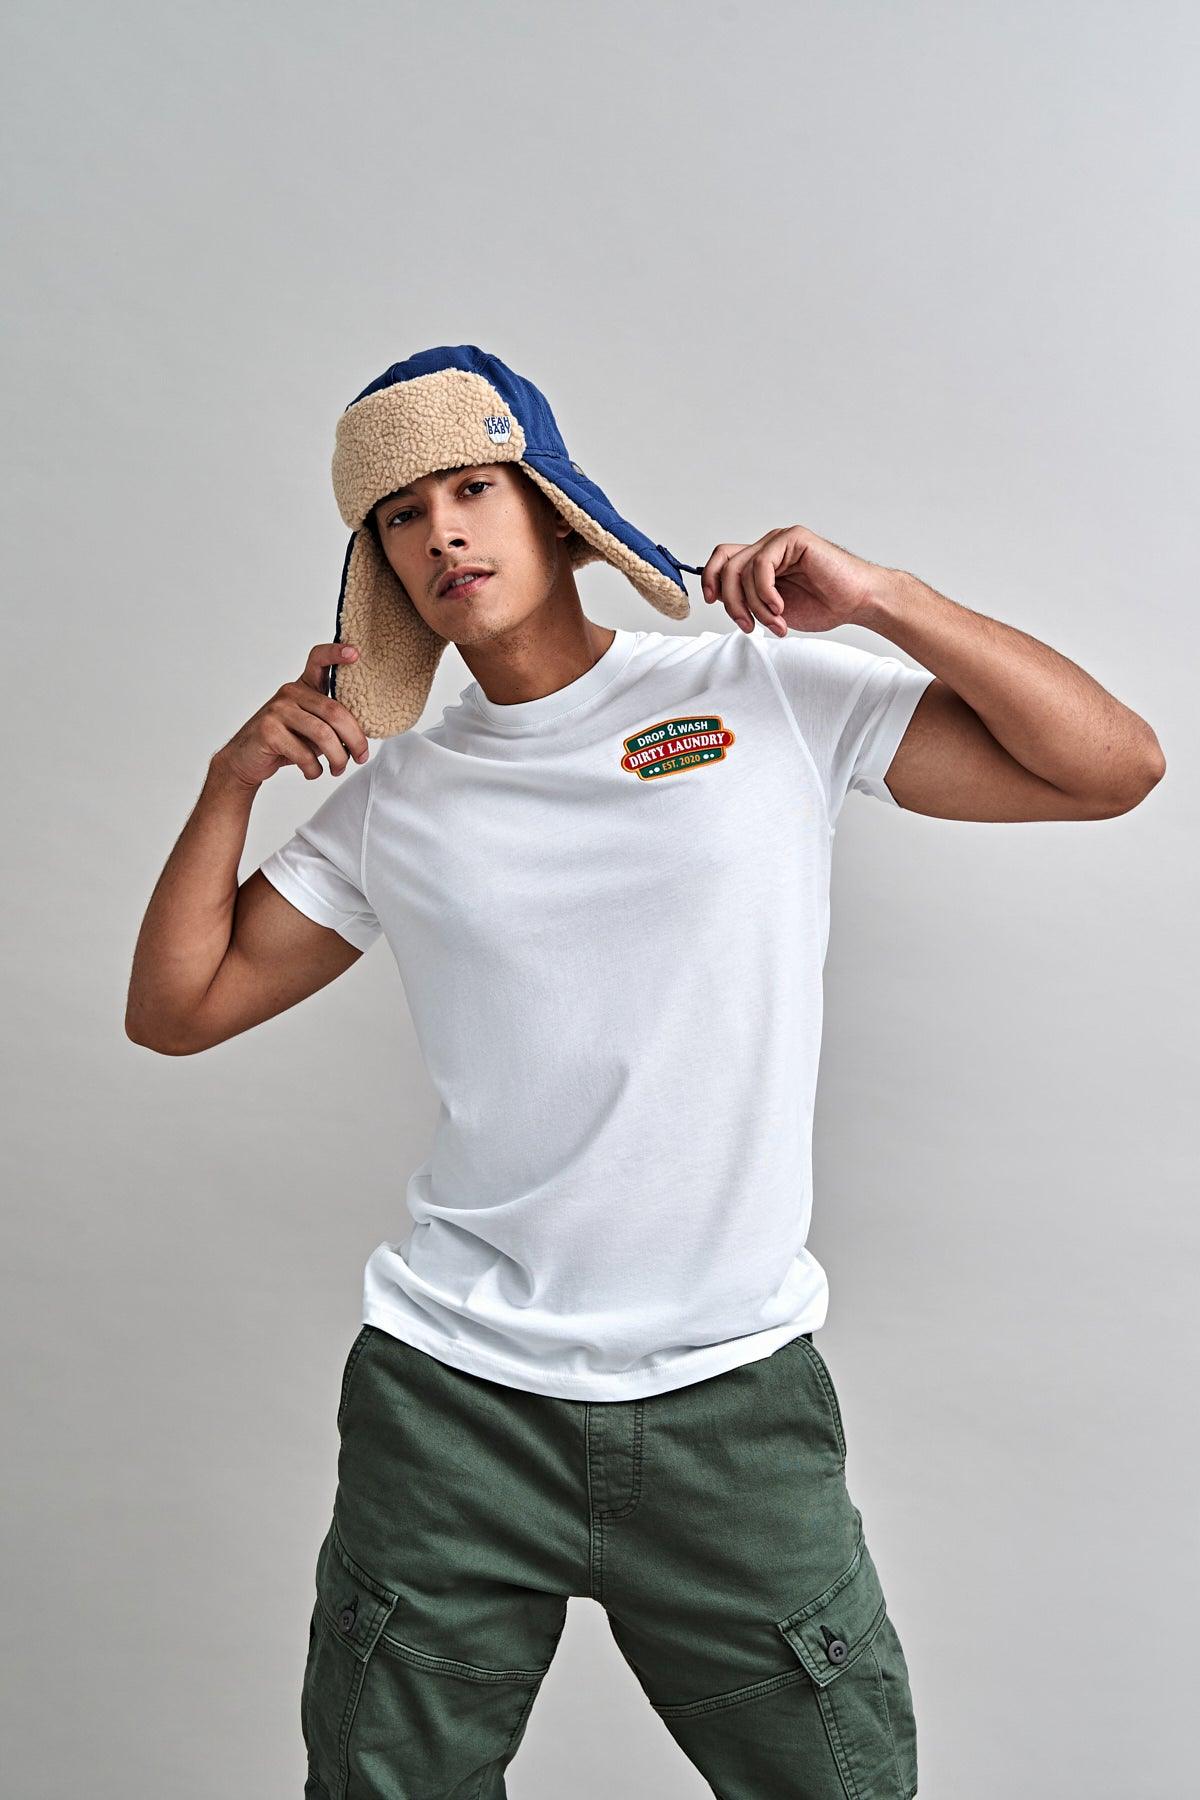 Dirty Laundry Drop and Wash Patch Supima Cotton T-shirt